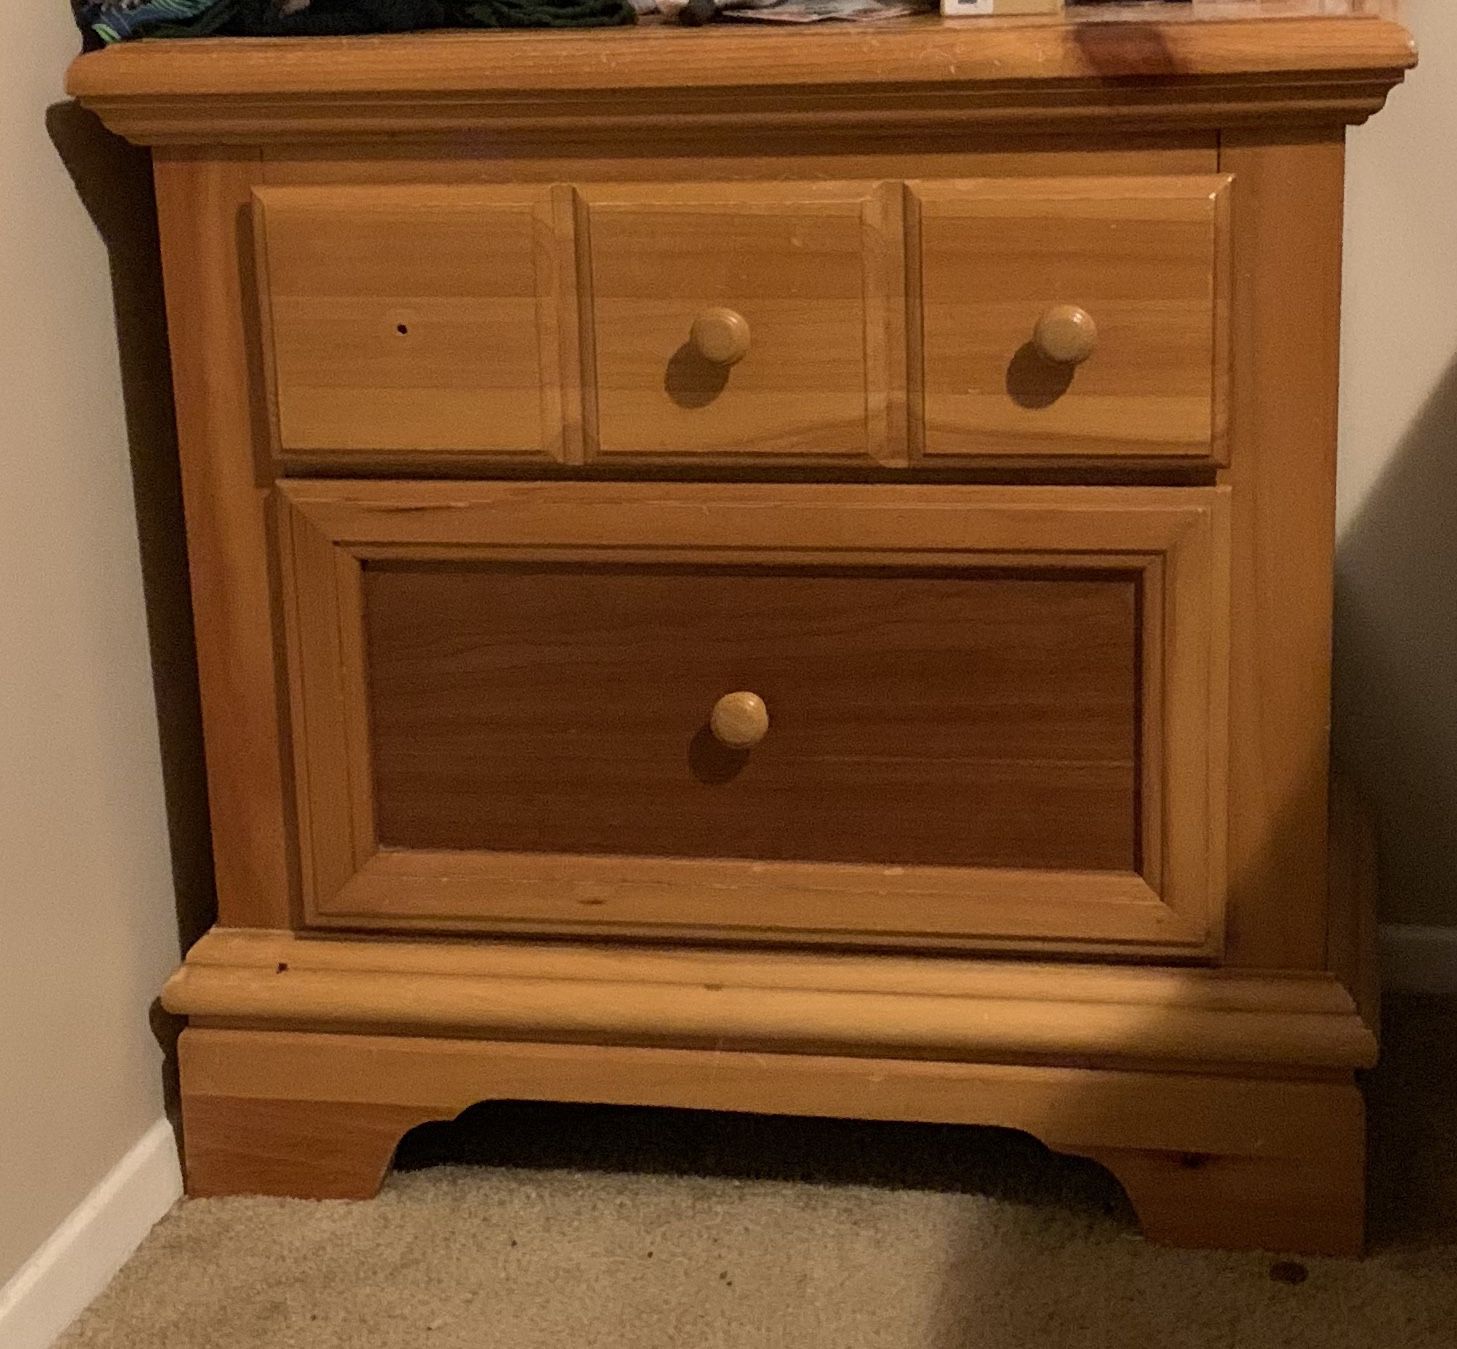 Bedroom set must go!! - must be able to pick up